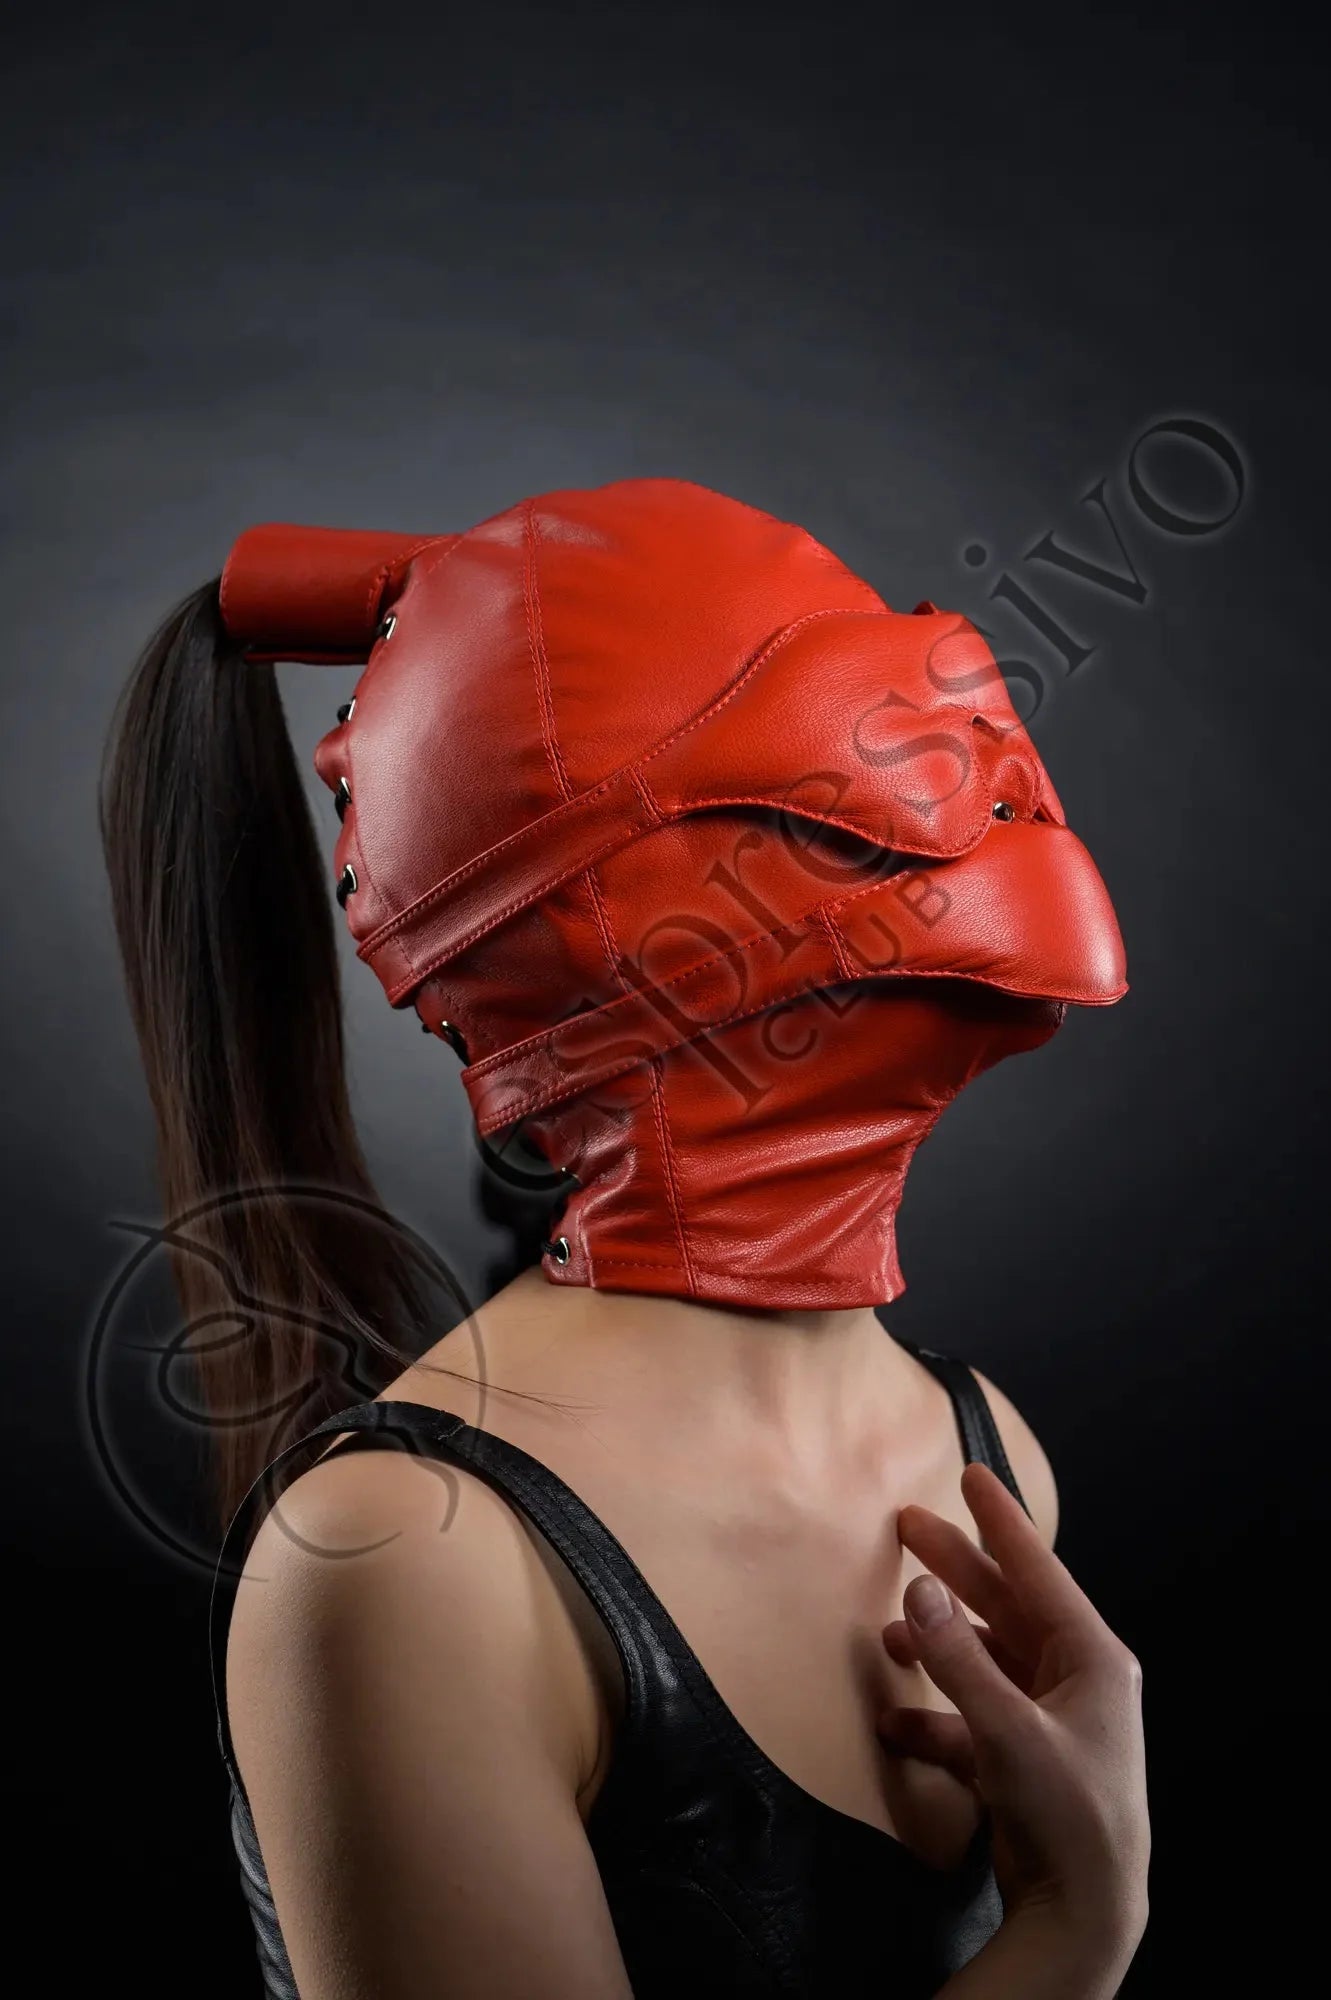 BDSM Ponytail Hood with Leather Blindfold and Muffle Gag